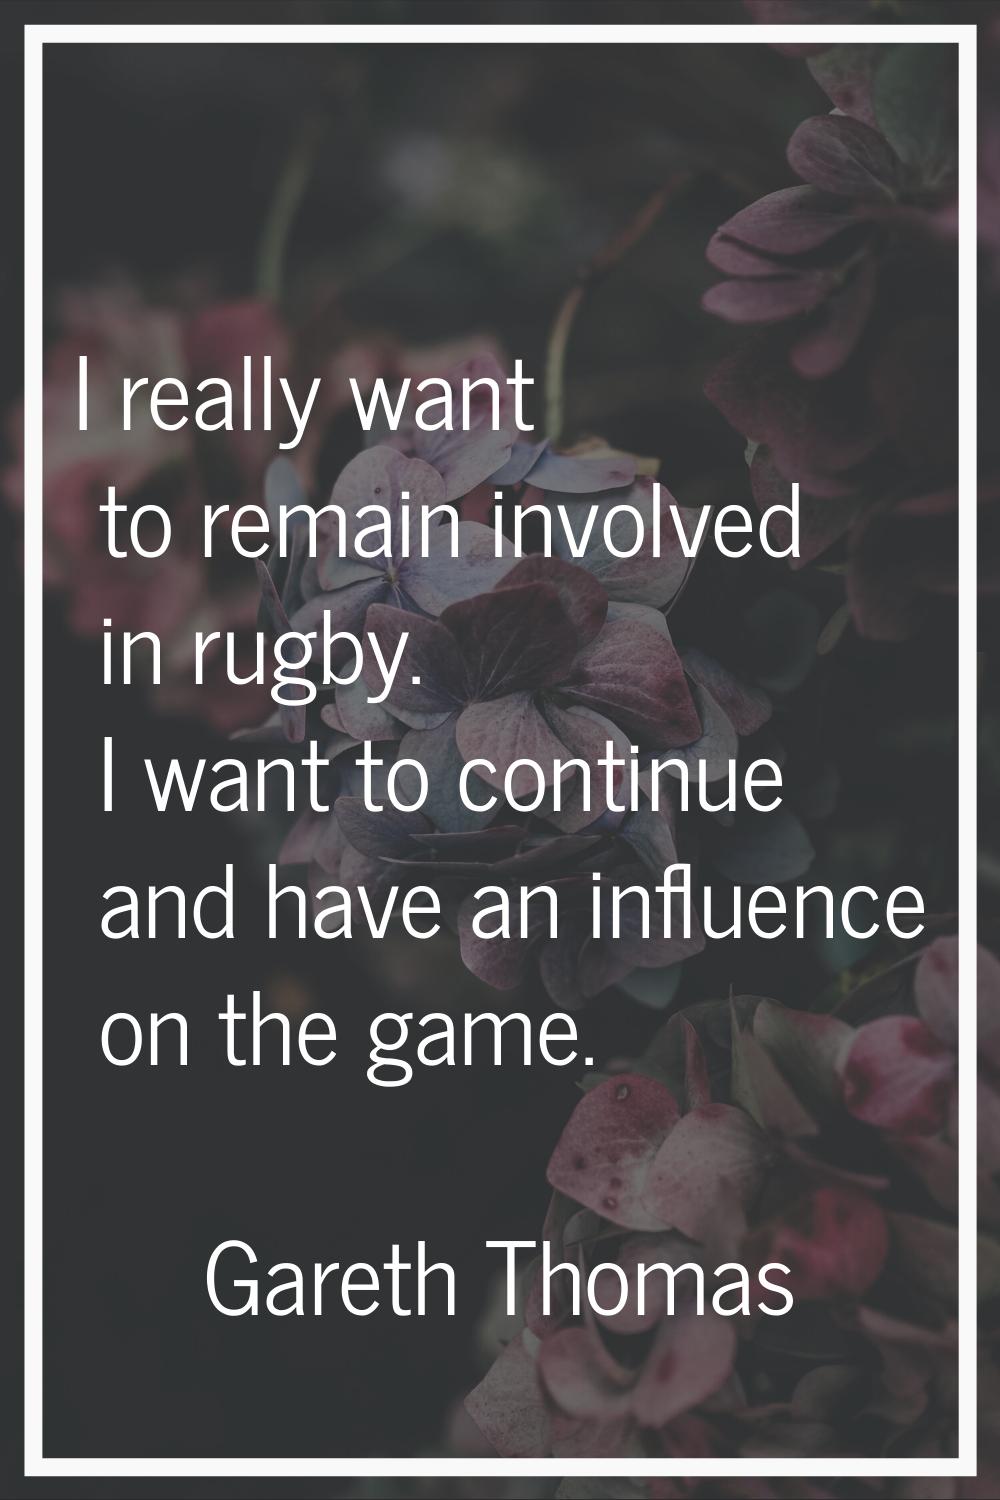 I really want to remain involved in rugby. I want to continue and have an influence on the game.